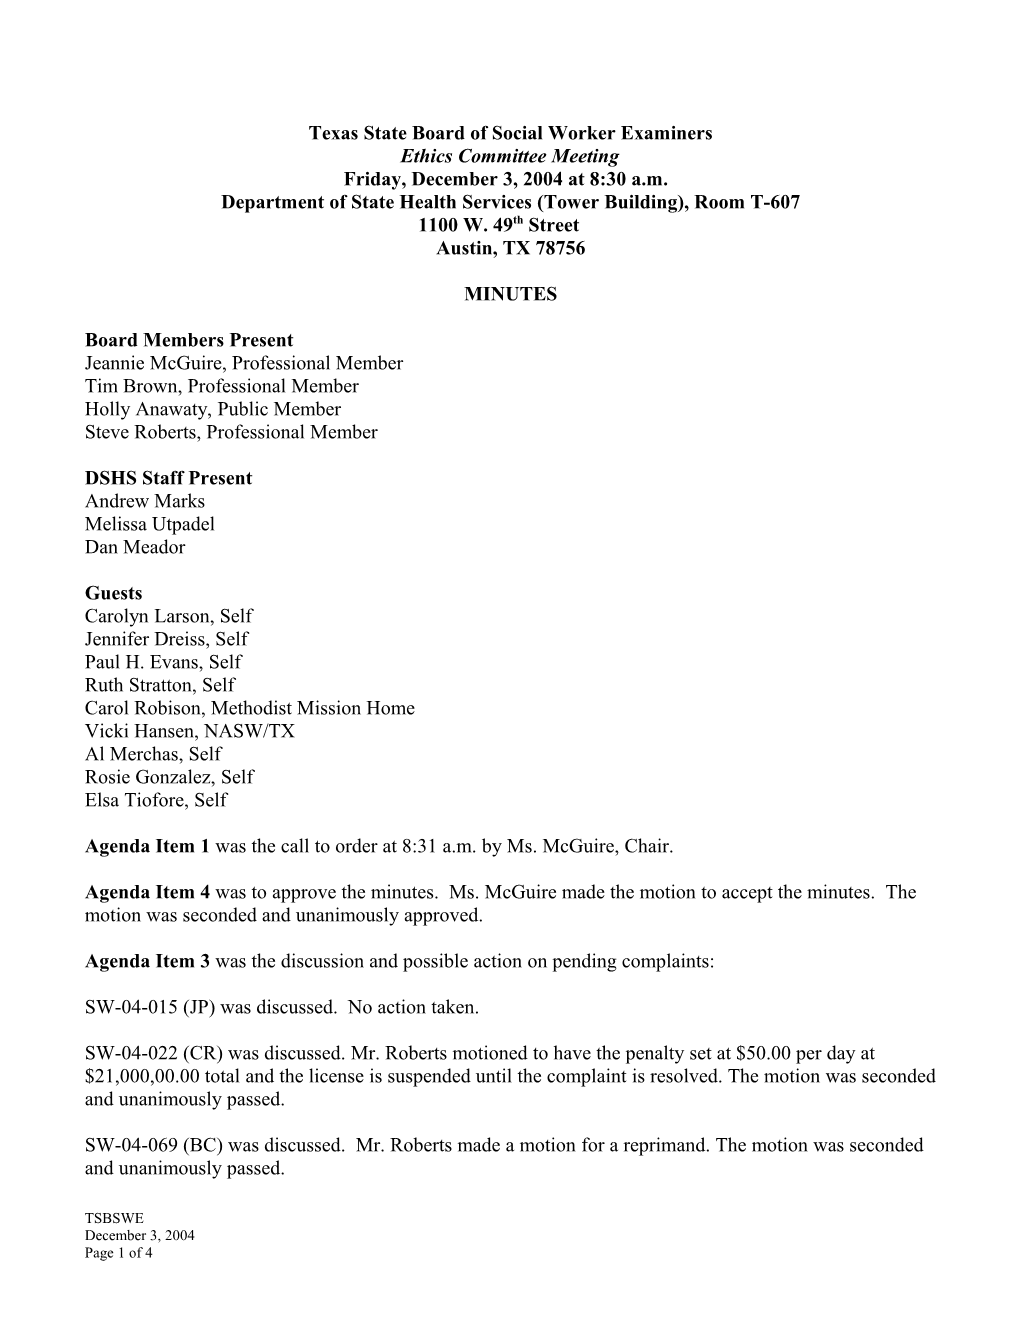 Ethics Committee Minutes December 2004